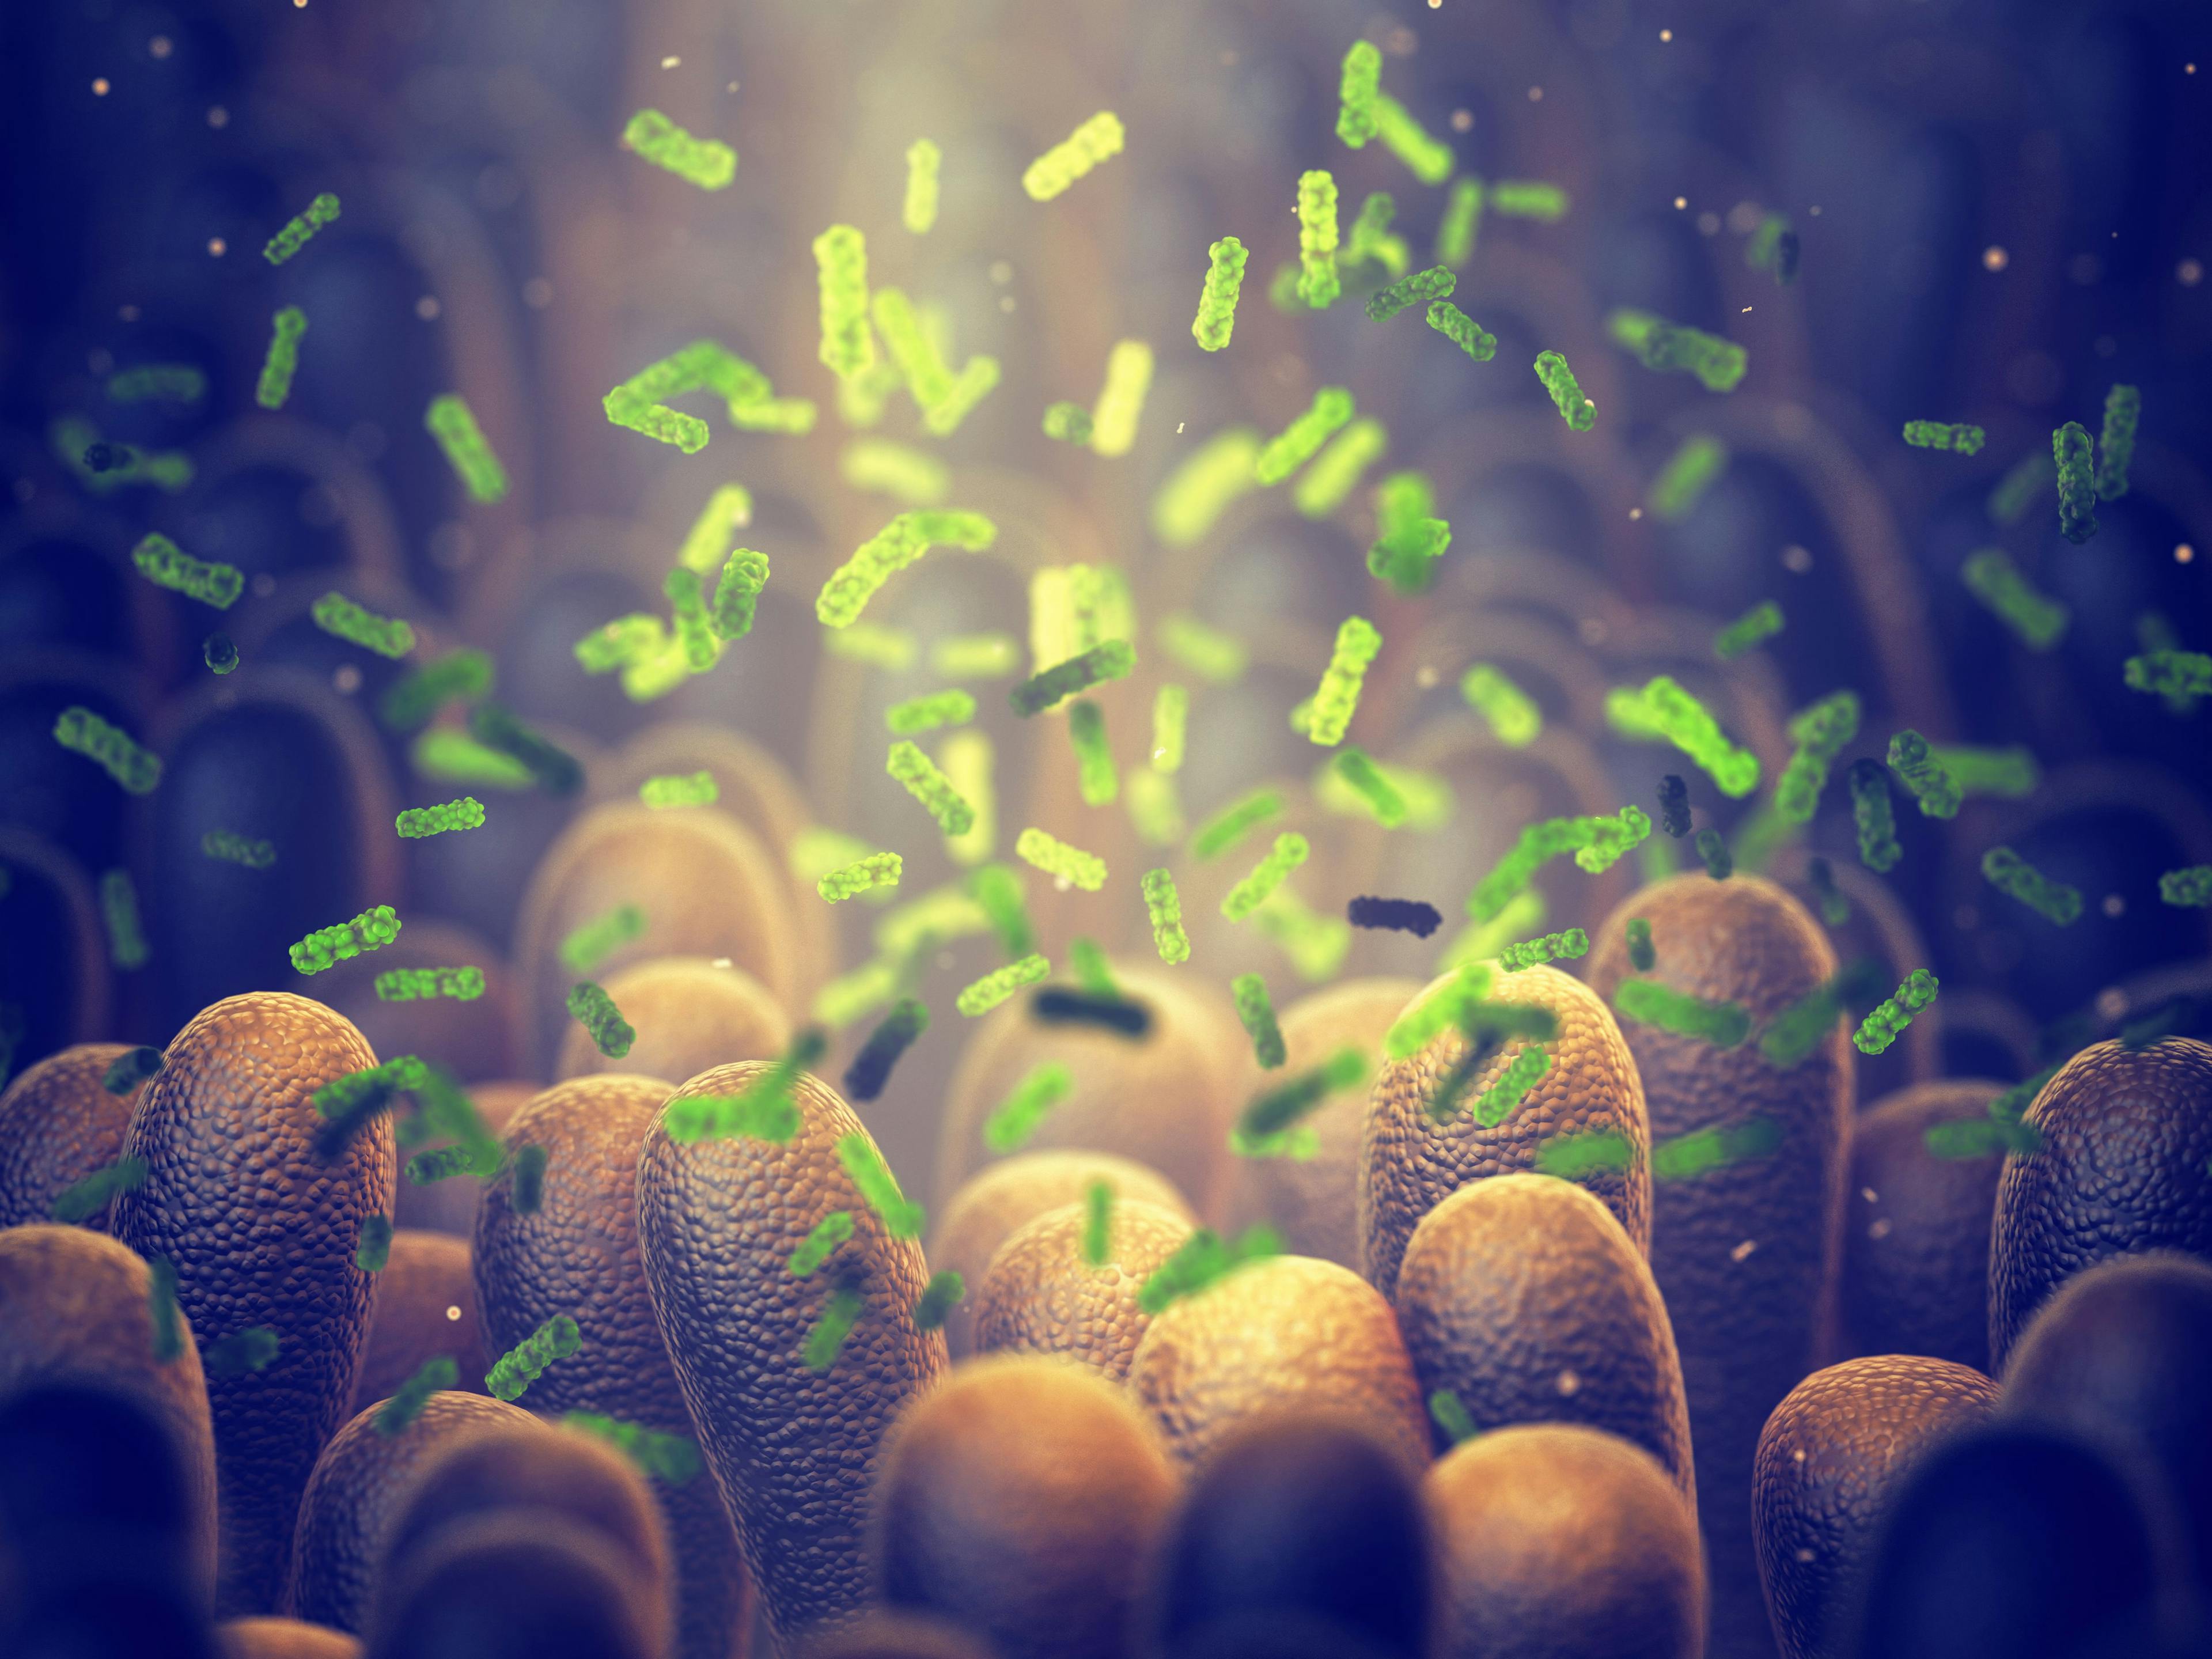 Gut Microbes May Assist in Educating Immune System Early in Development